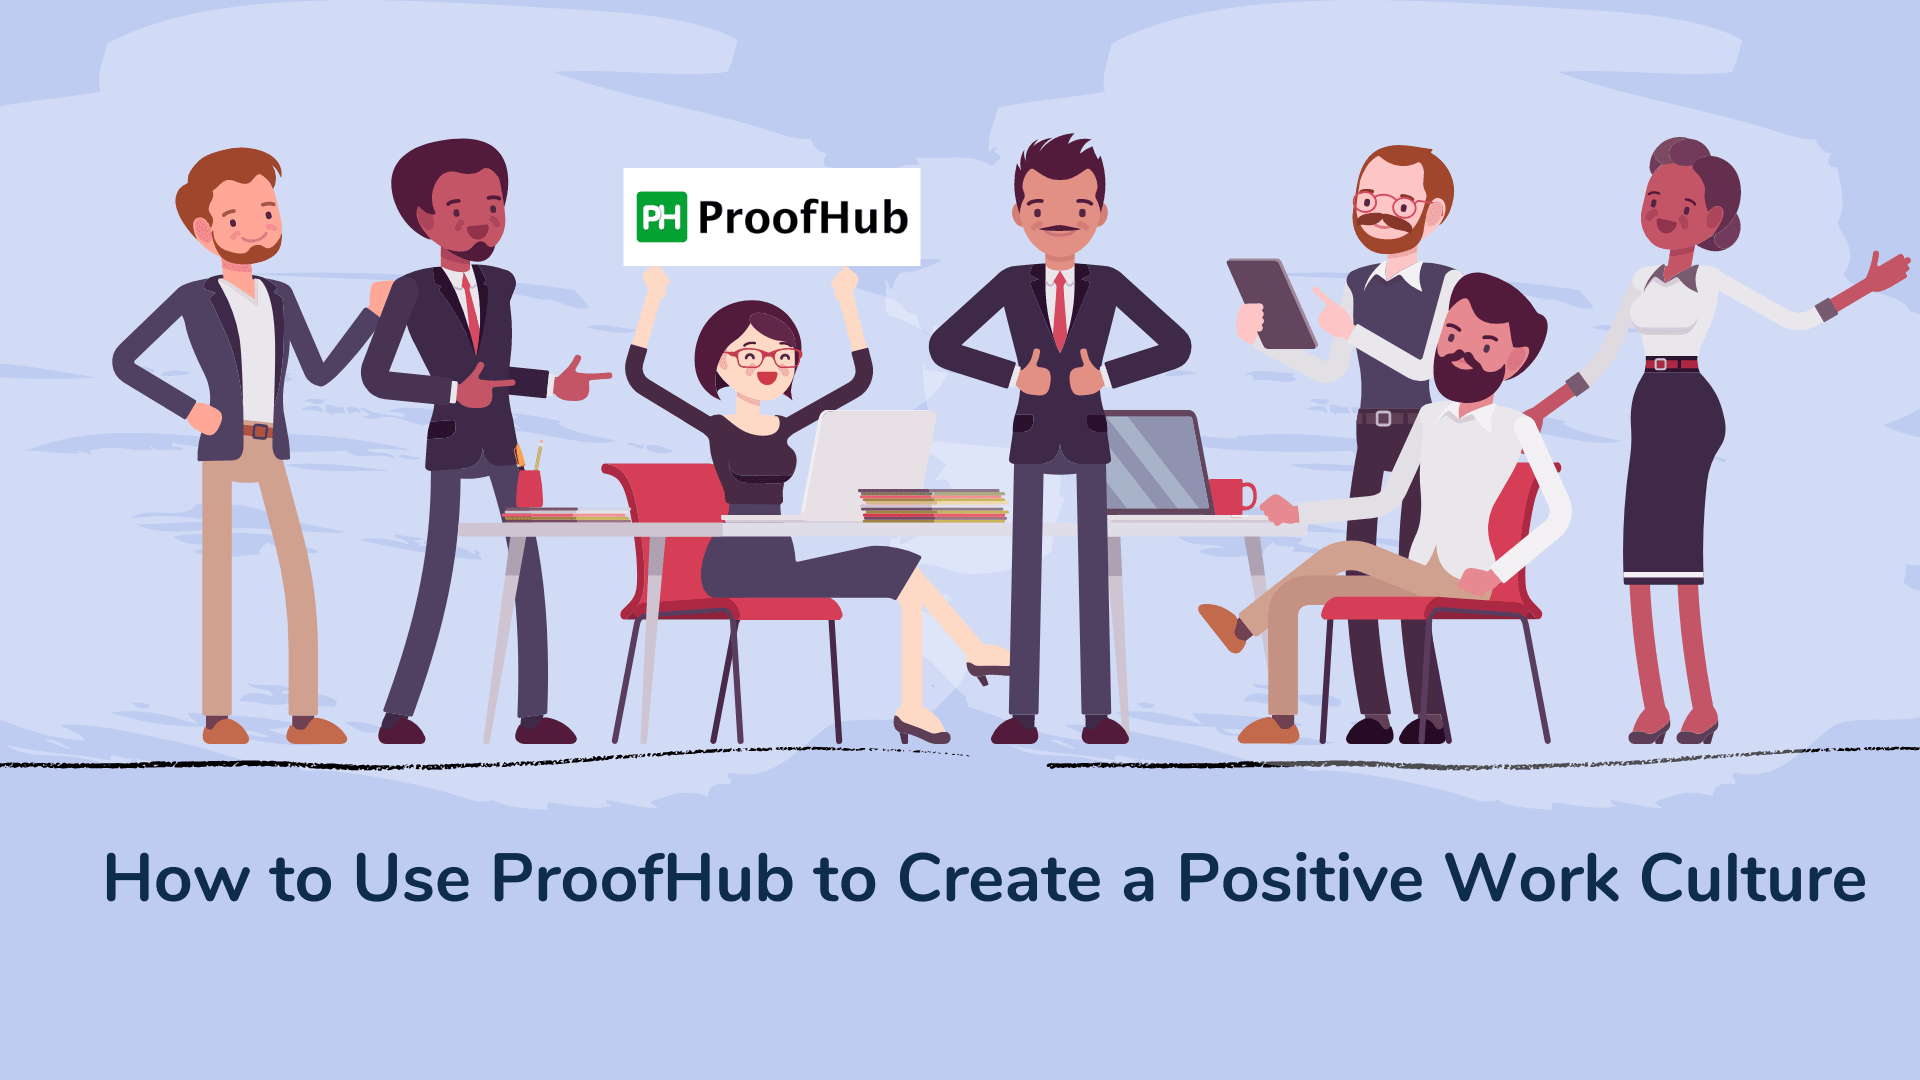 How to Use ProofHub to Create a Positive Work Culture